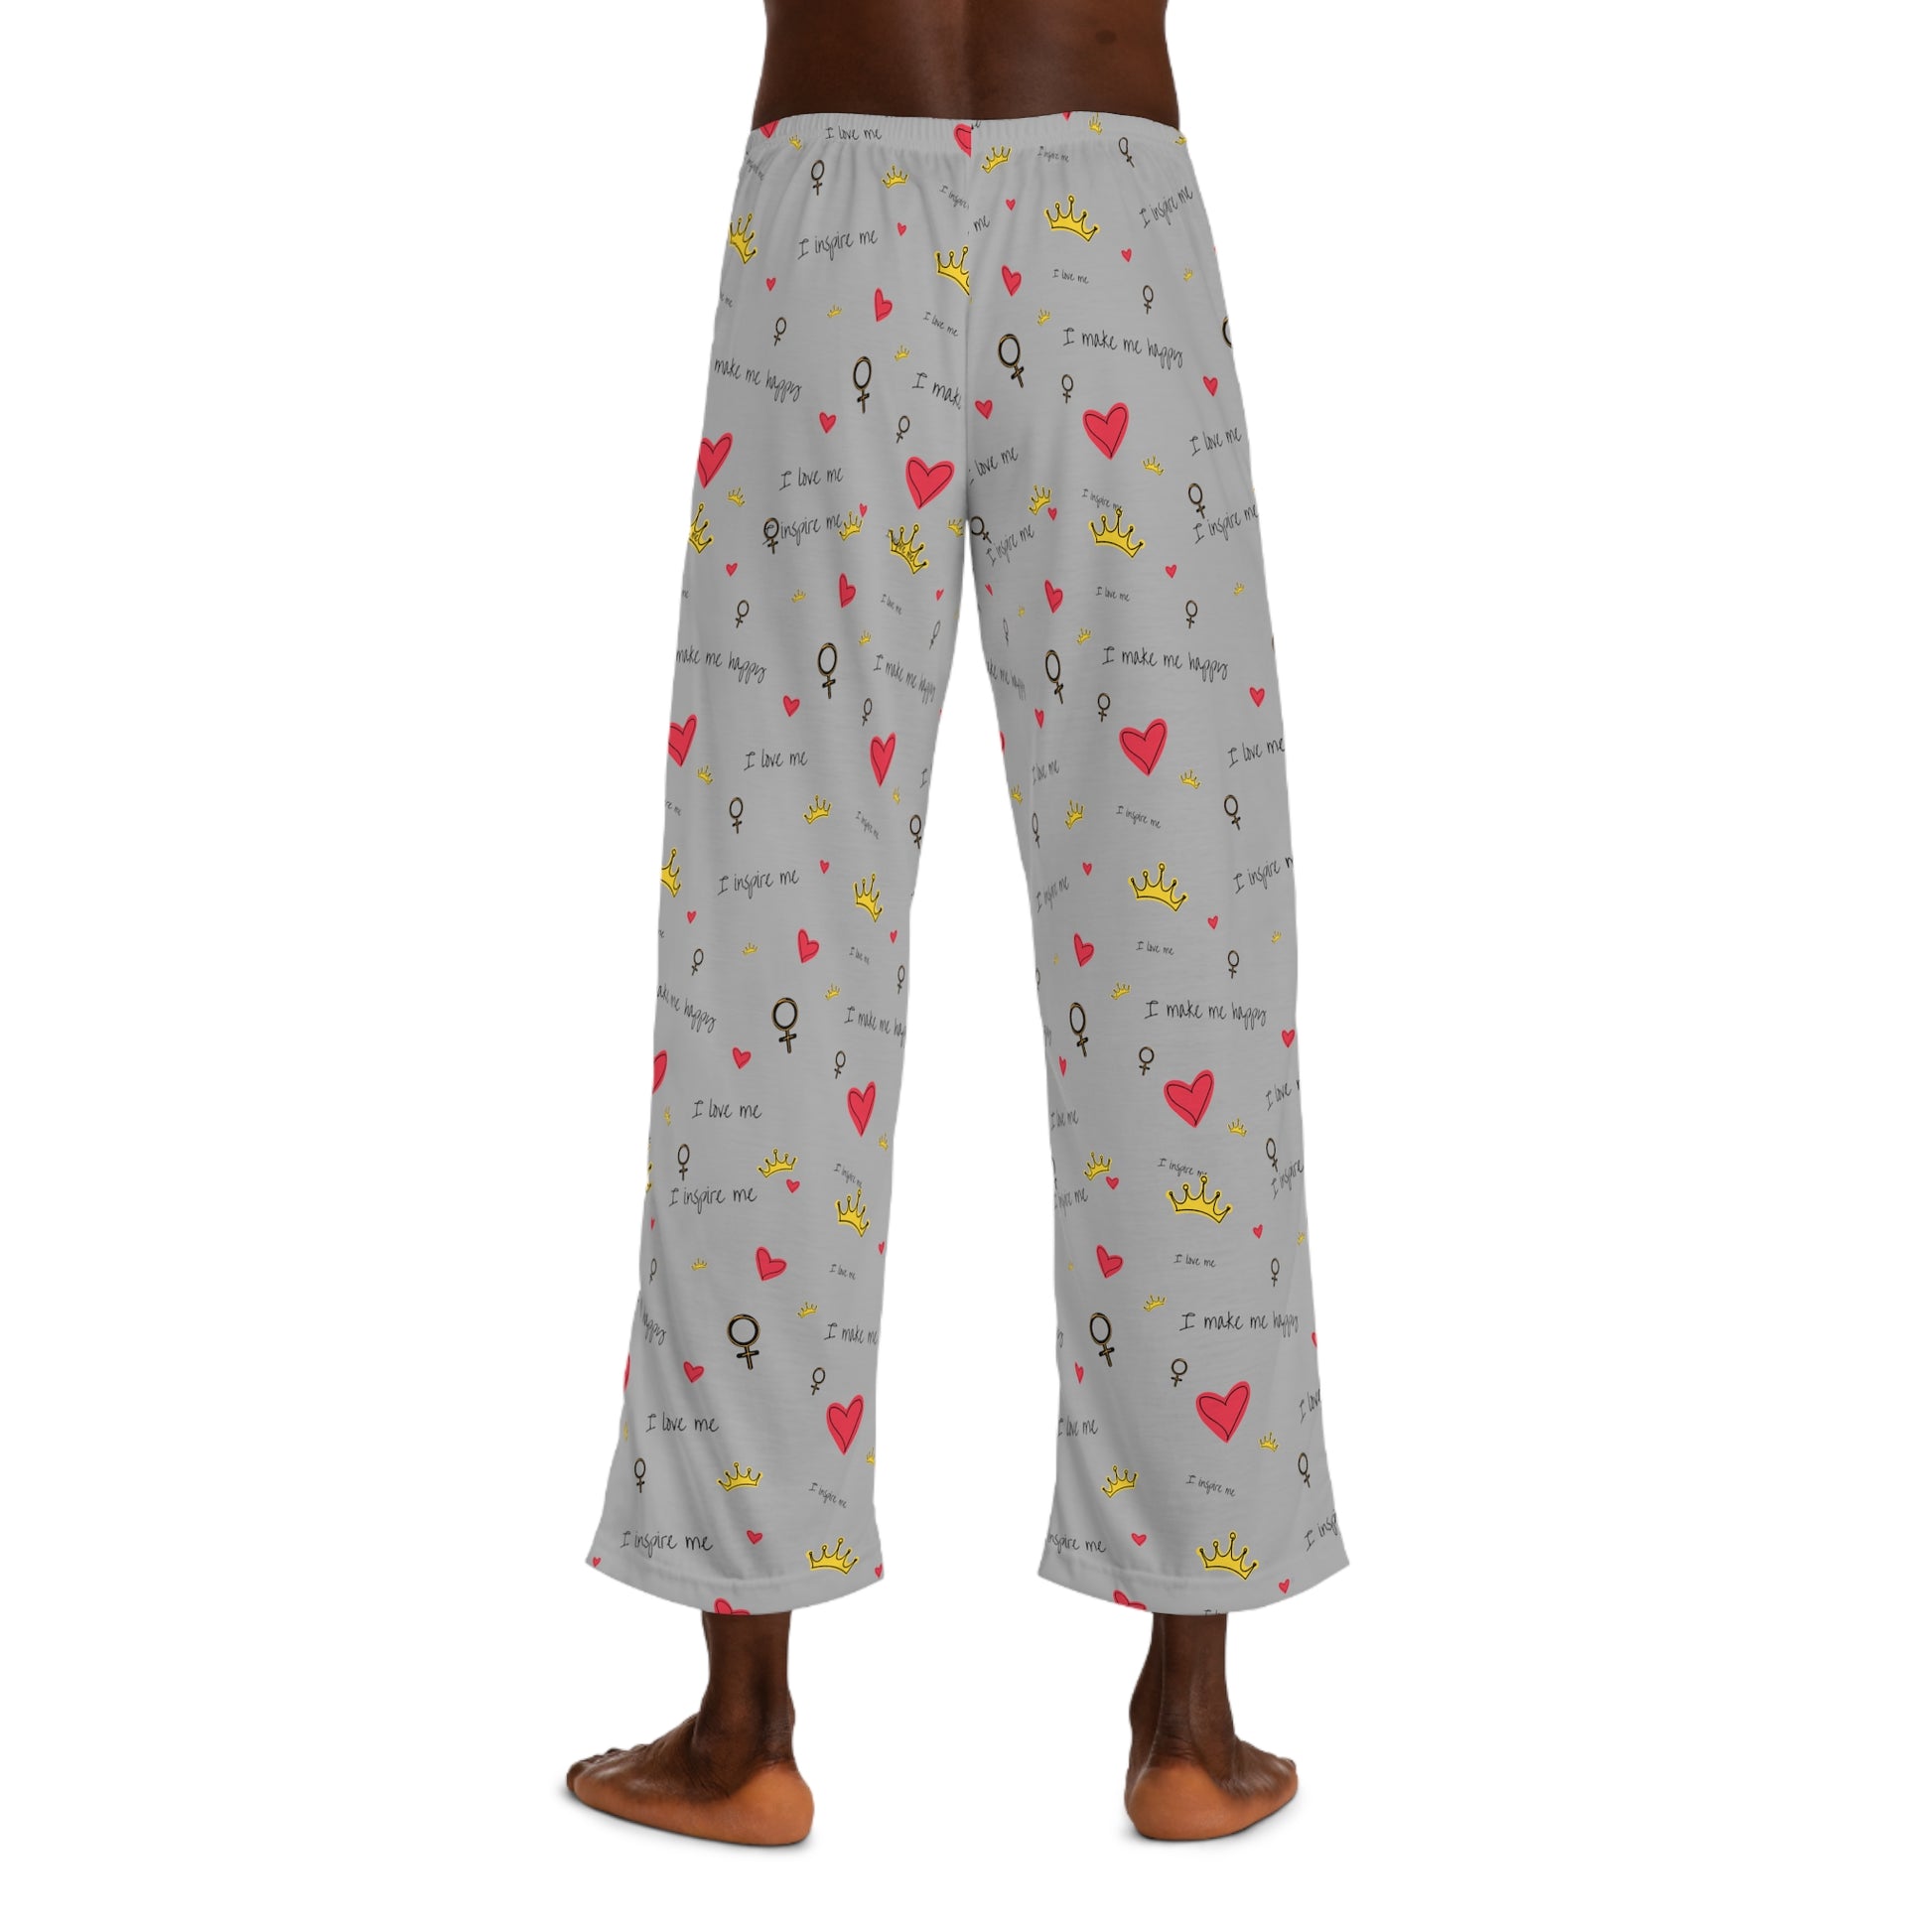 A man wearing Printify Men's Pajama Pants: Polyester jersey; Relaxed fit; Elastic; Drawstring with hearts on them made of 100% polyester.